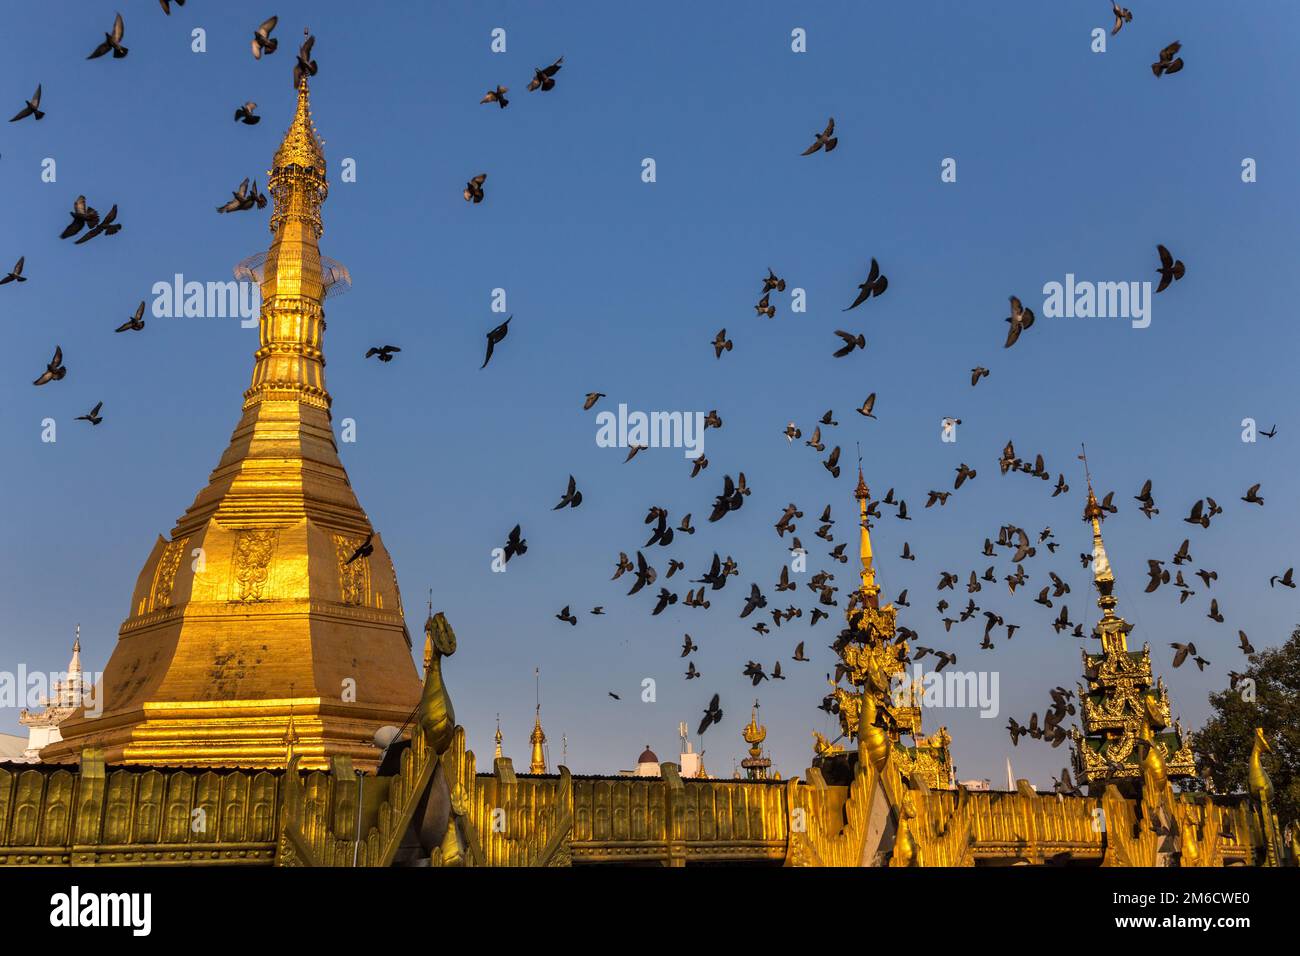 Gilded dome of a buddhist pagoda. Startled flock of pigeons flying around it. Yangon, Myanmar Stock Photo